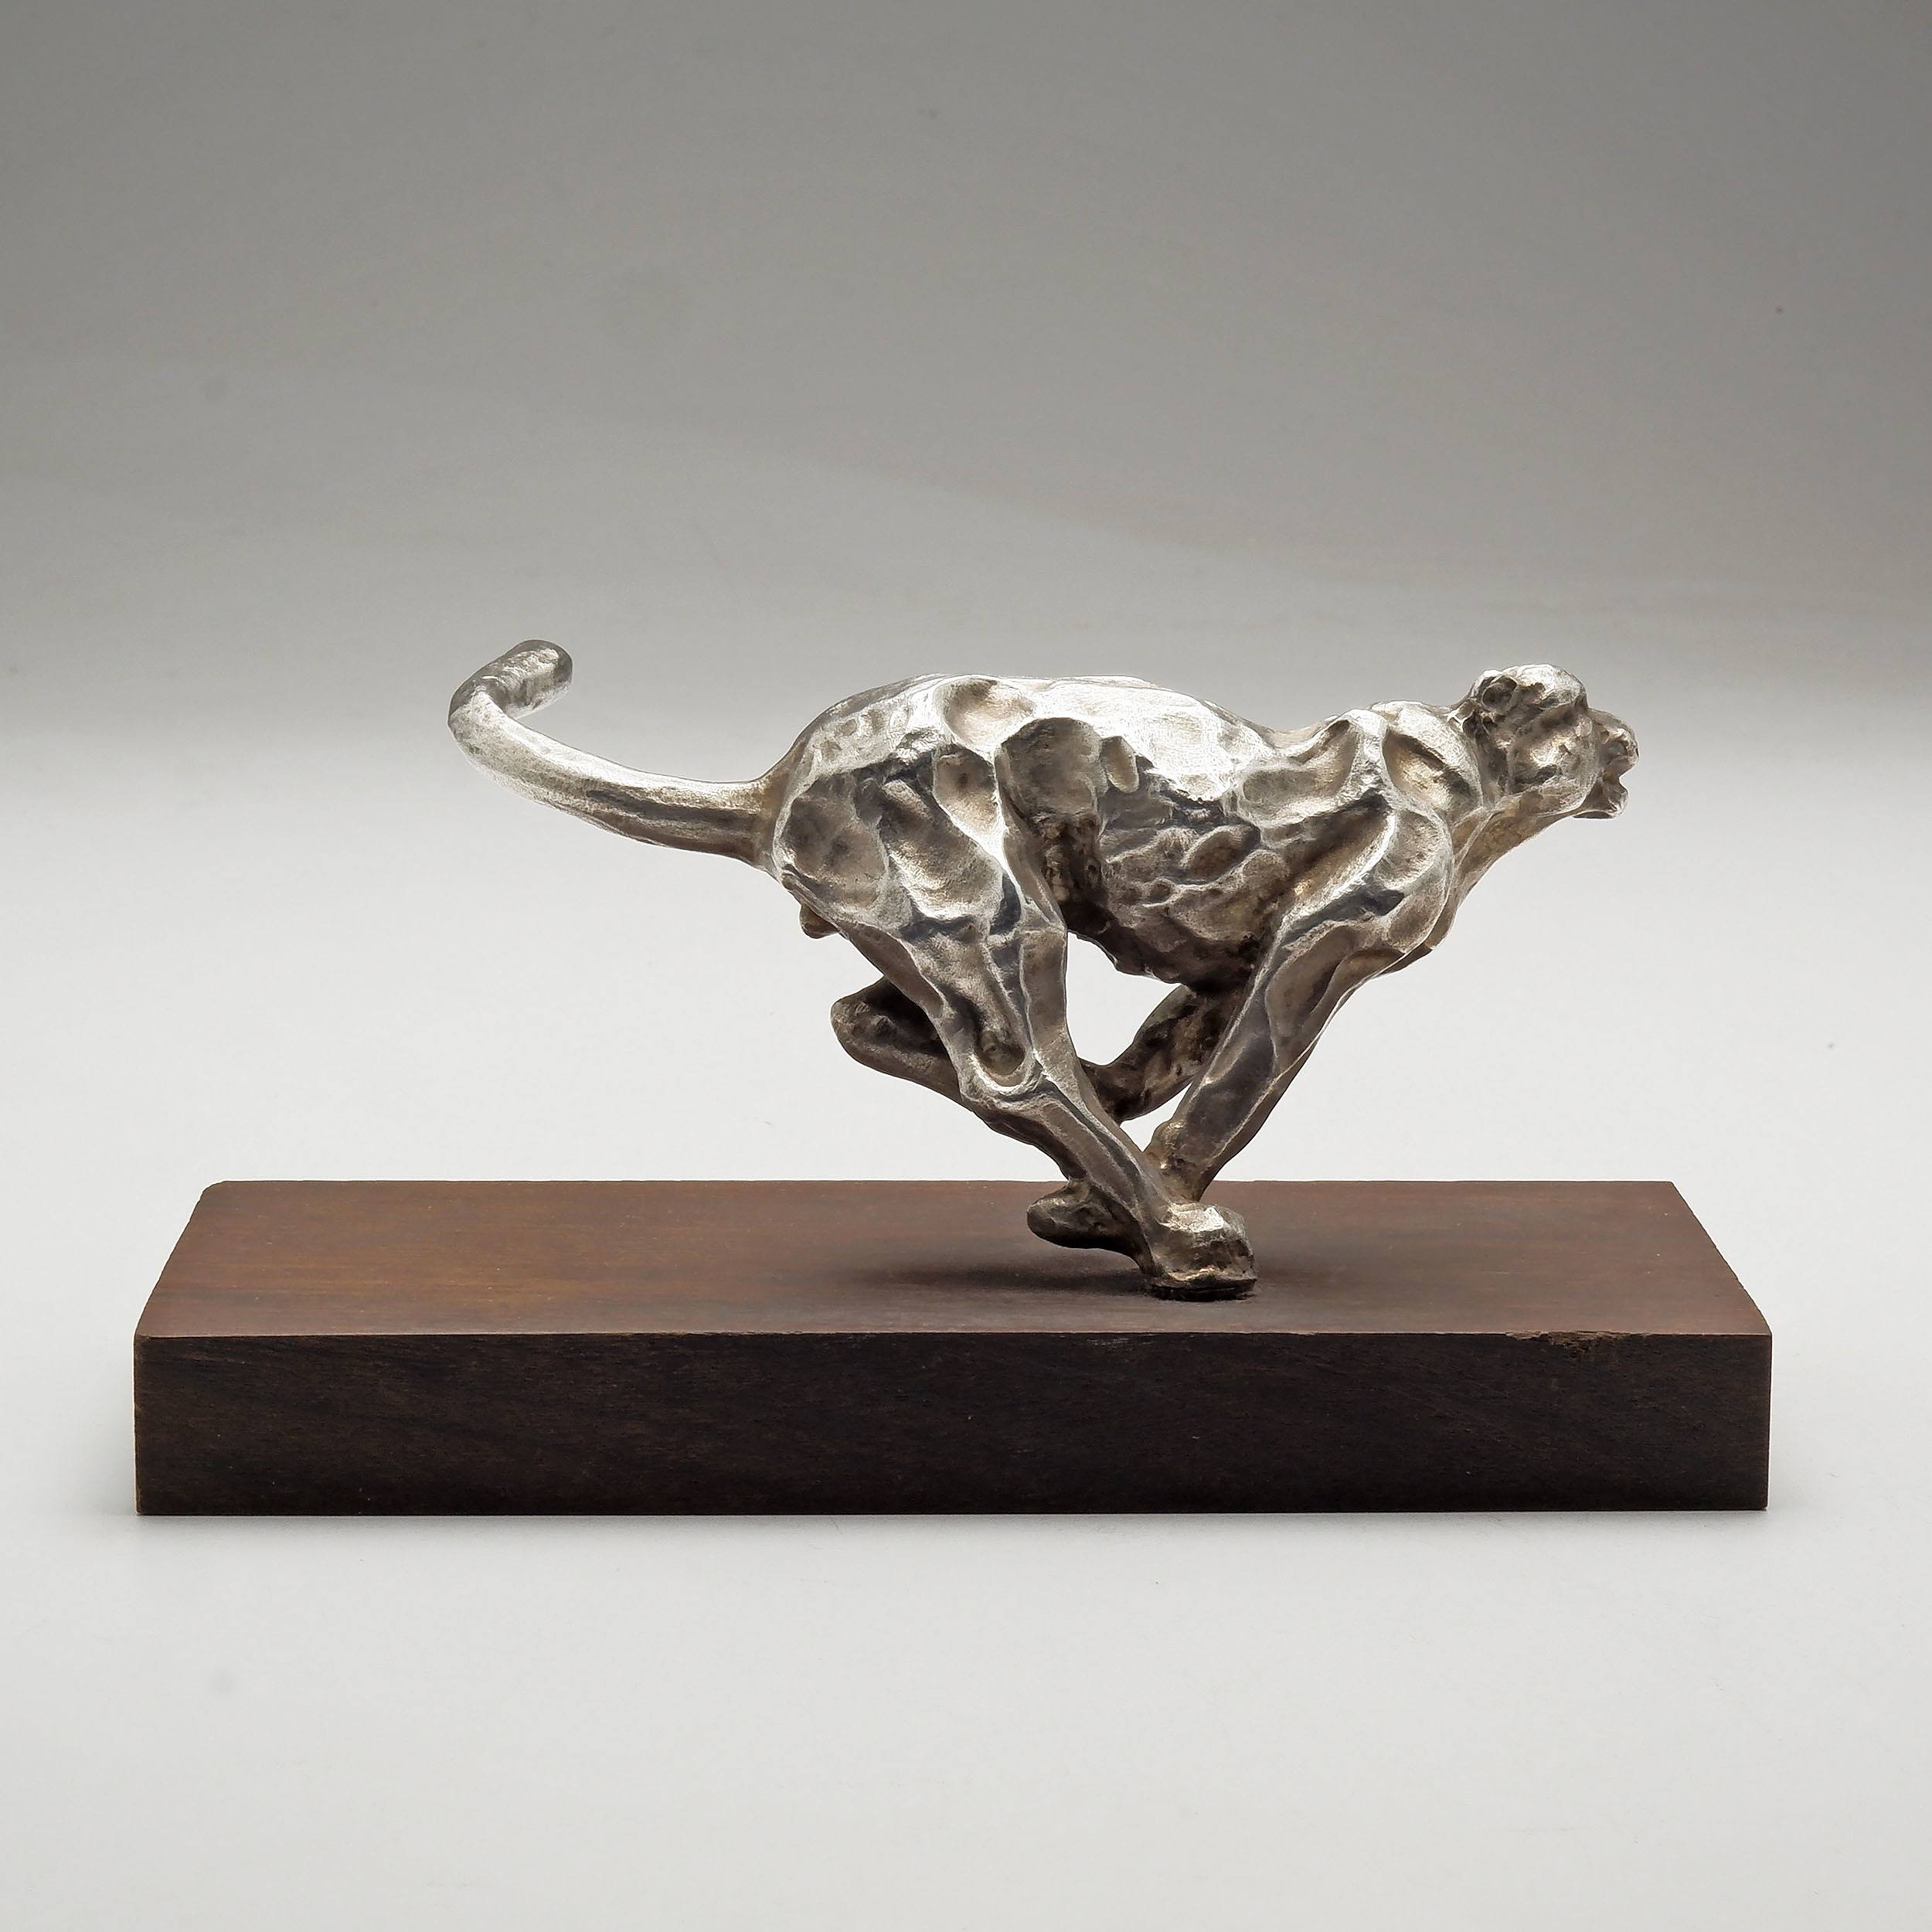 'Robert TF Lawrence (South African Born 1933) Limited Edition Solid Silver Figure of a Cheetah on Wooden Base'